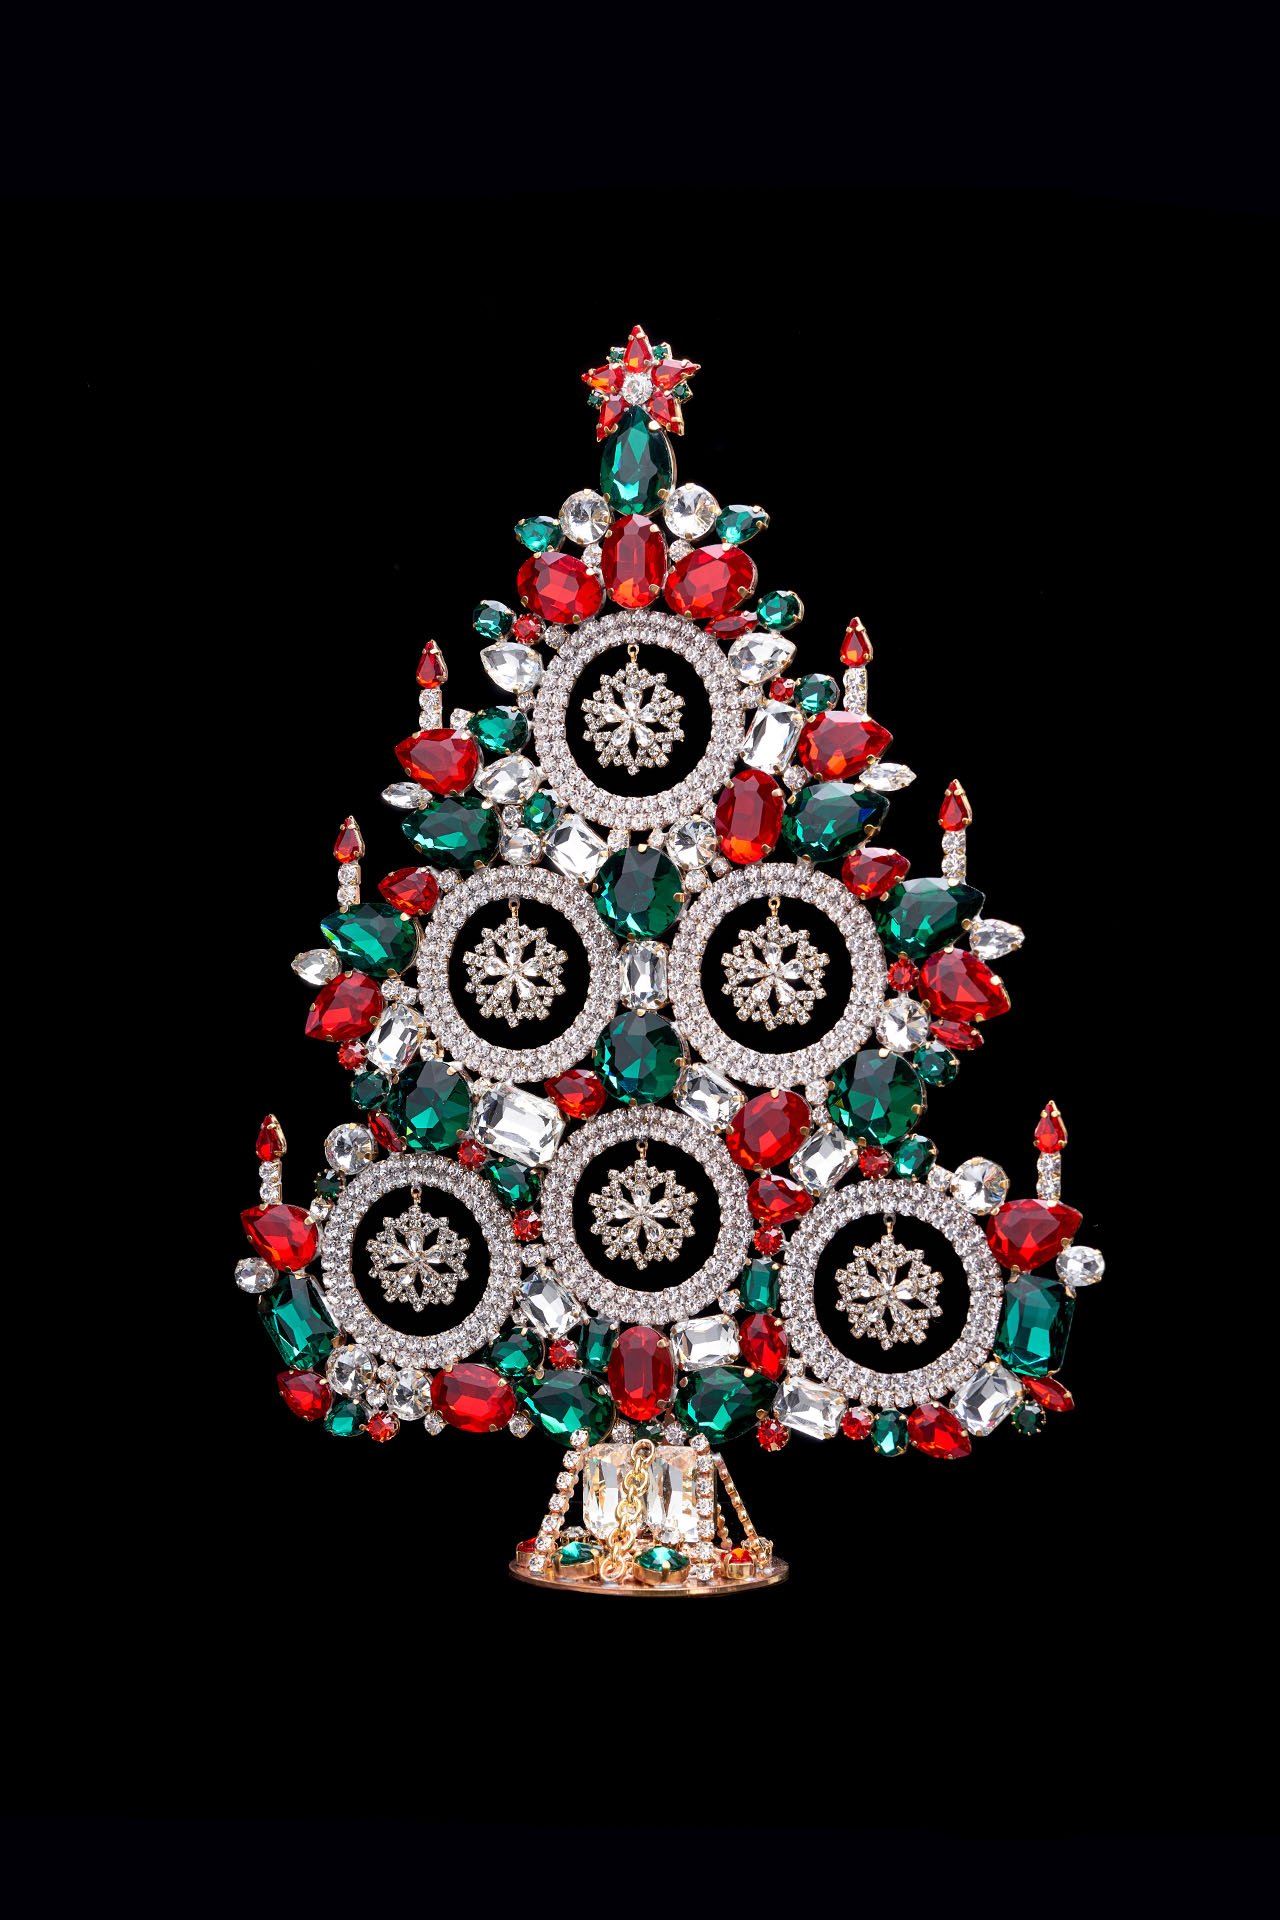 Handcrafted Majestic tabletop Czech Christmas tree - with colored crystals